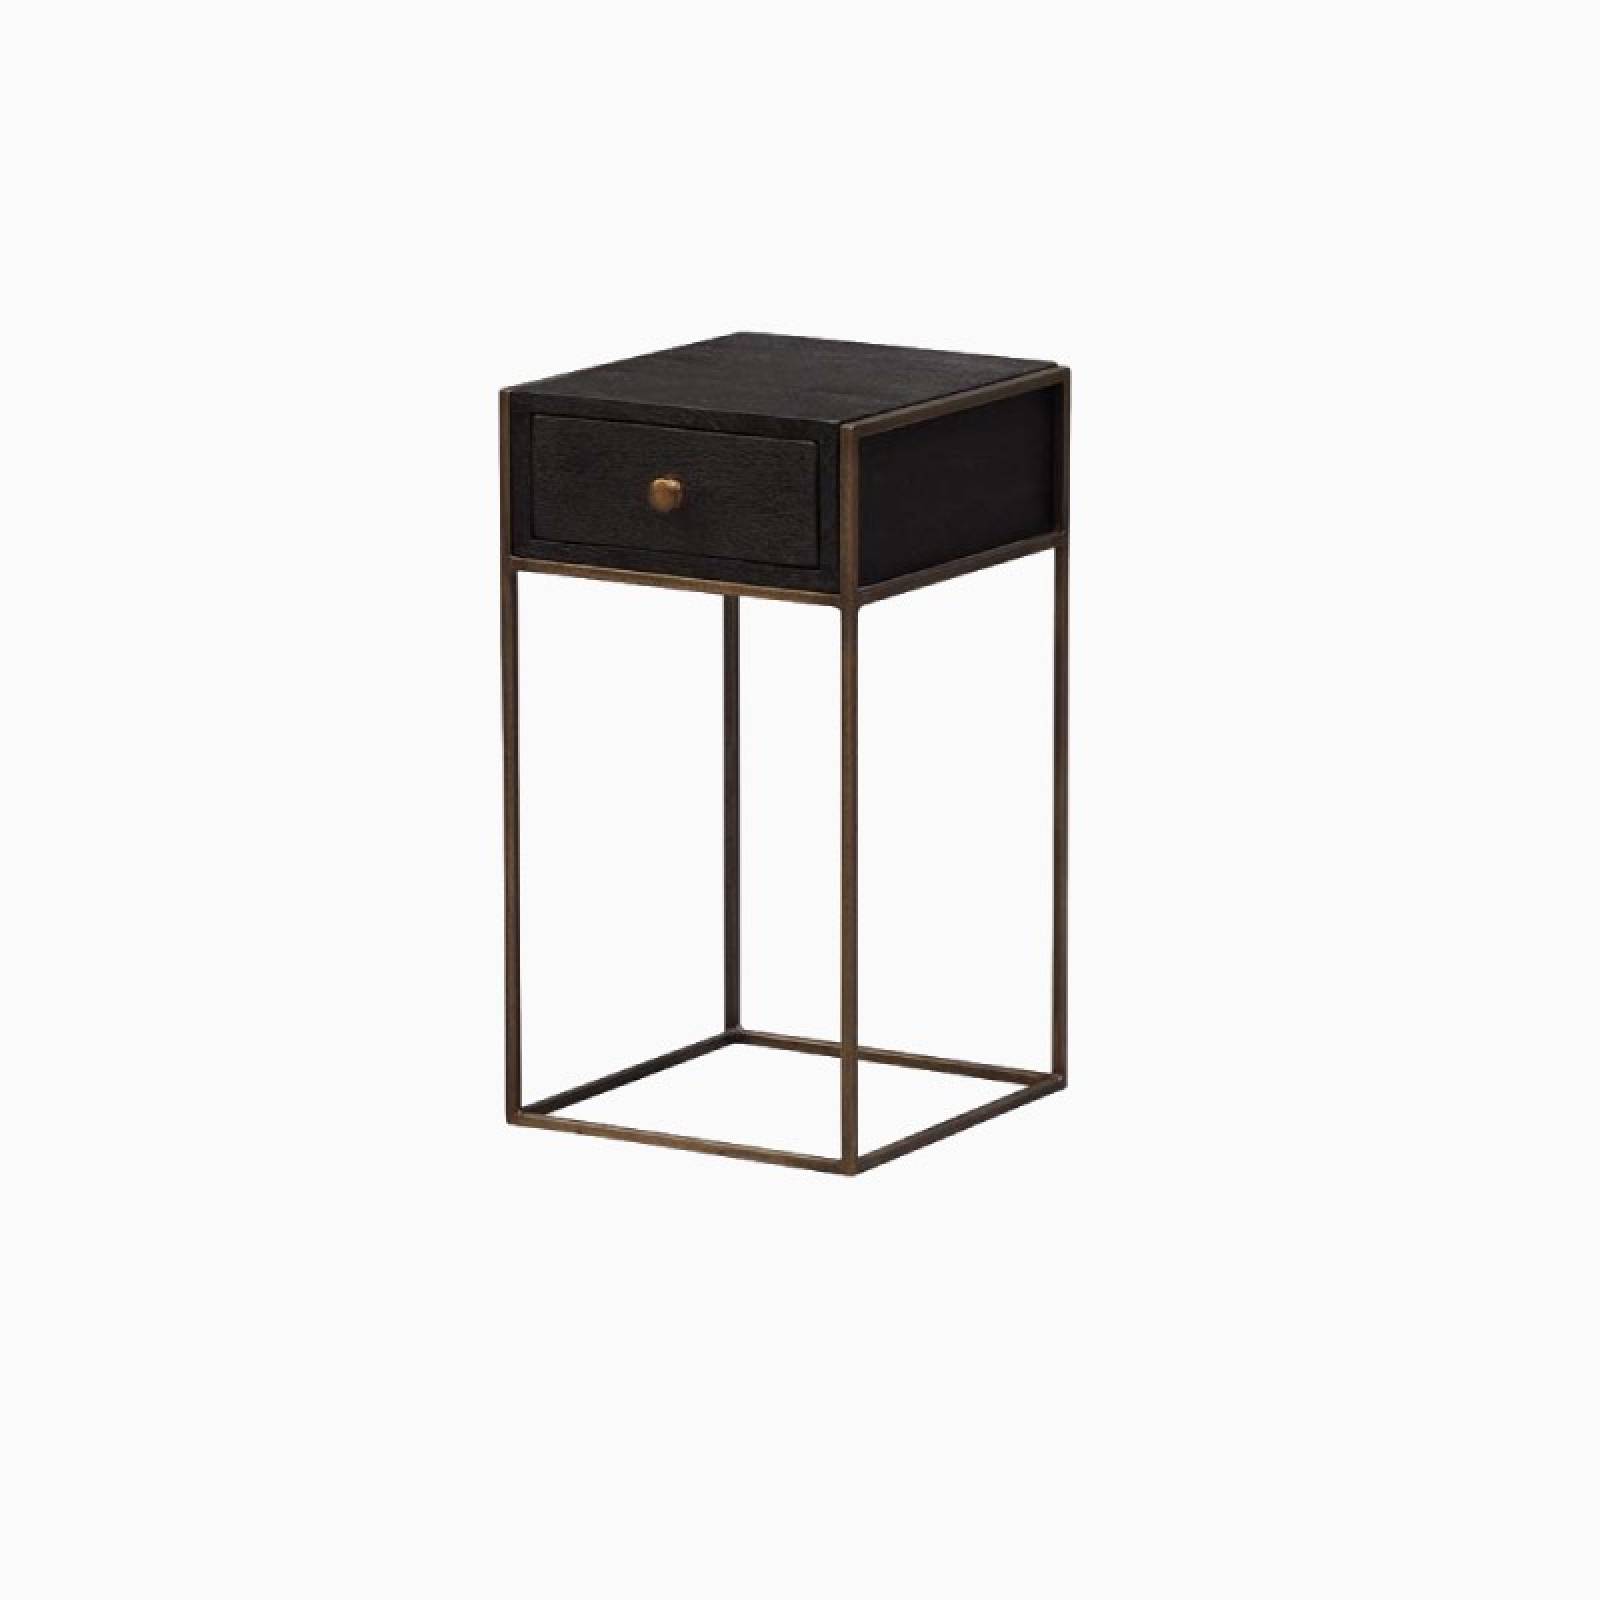 Wooden & Metal Bedside Table With Drawer